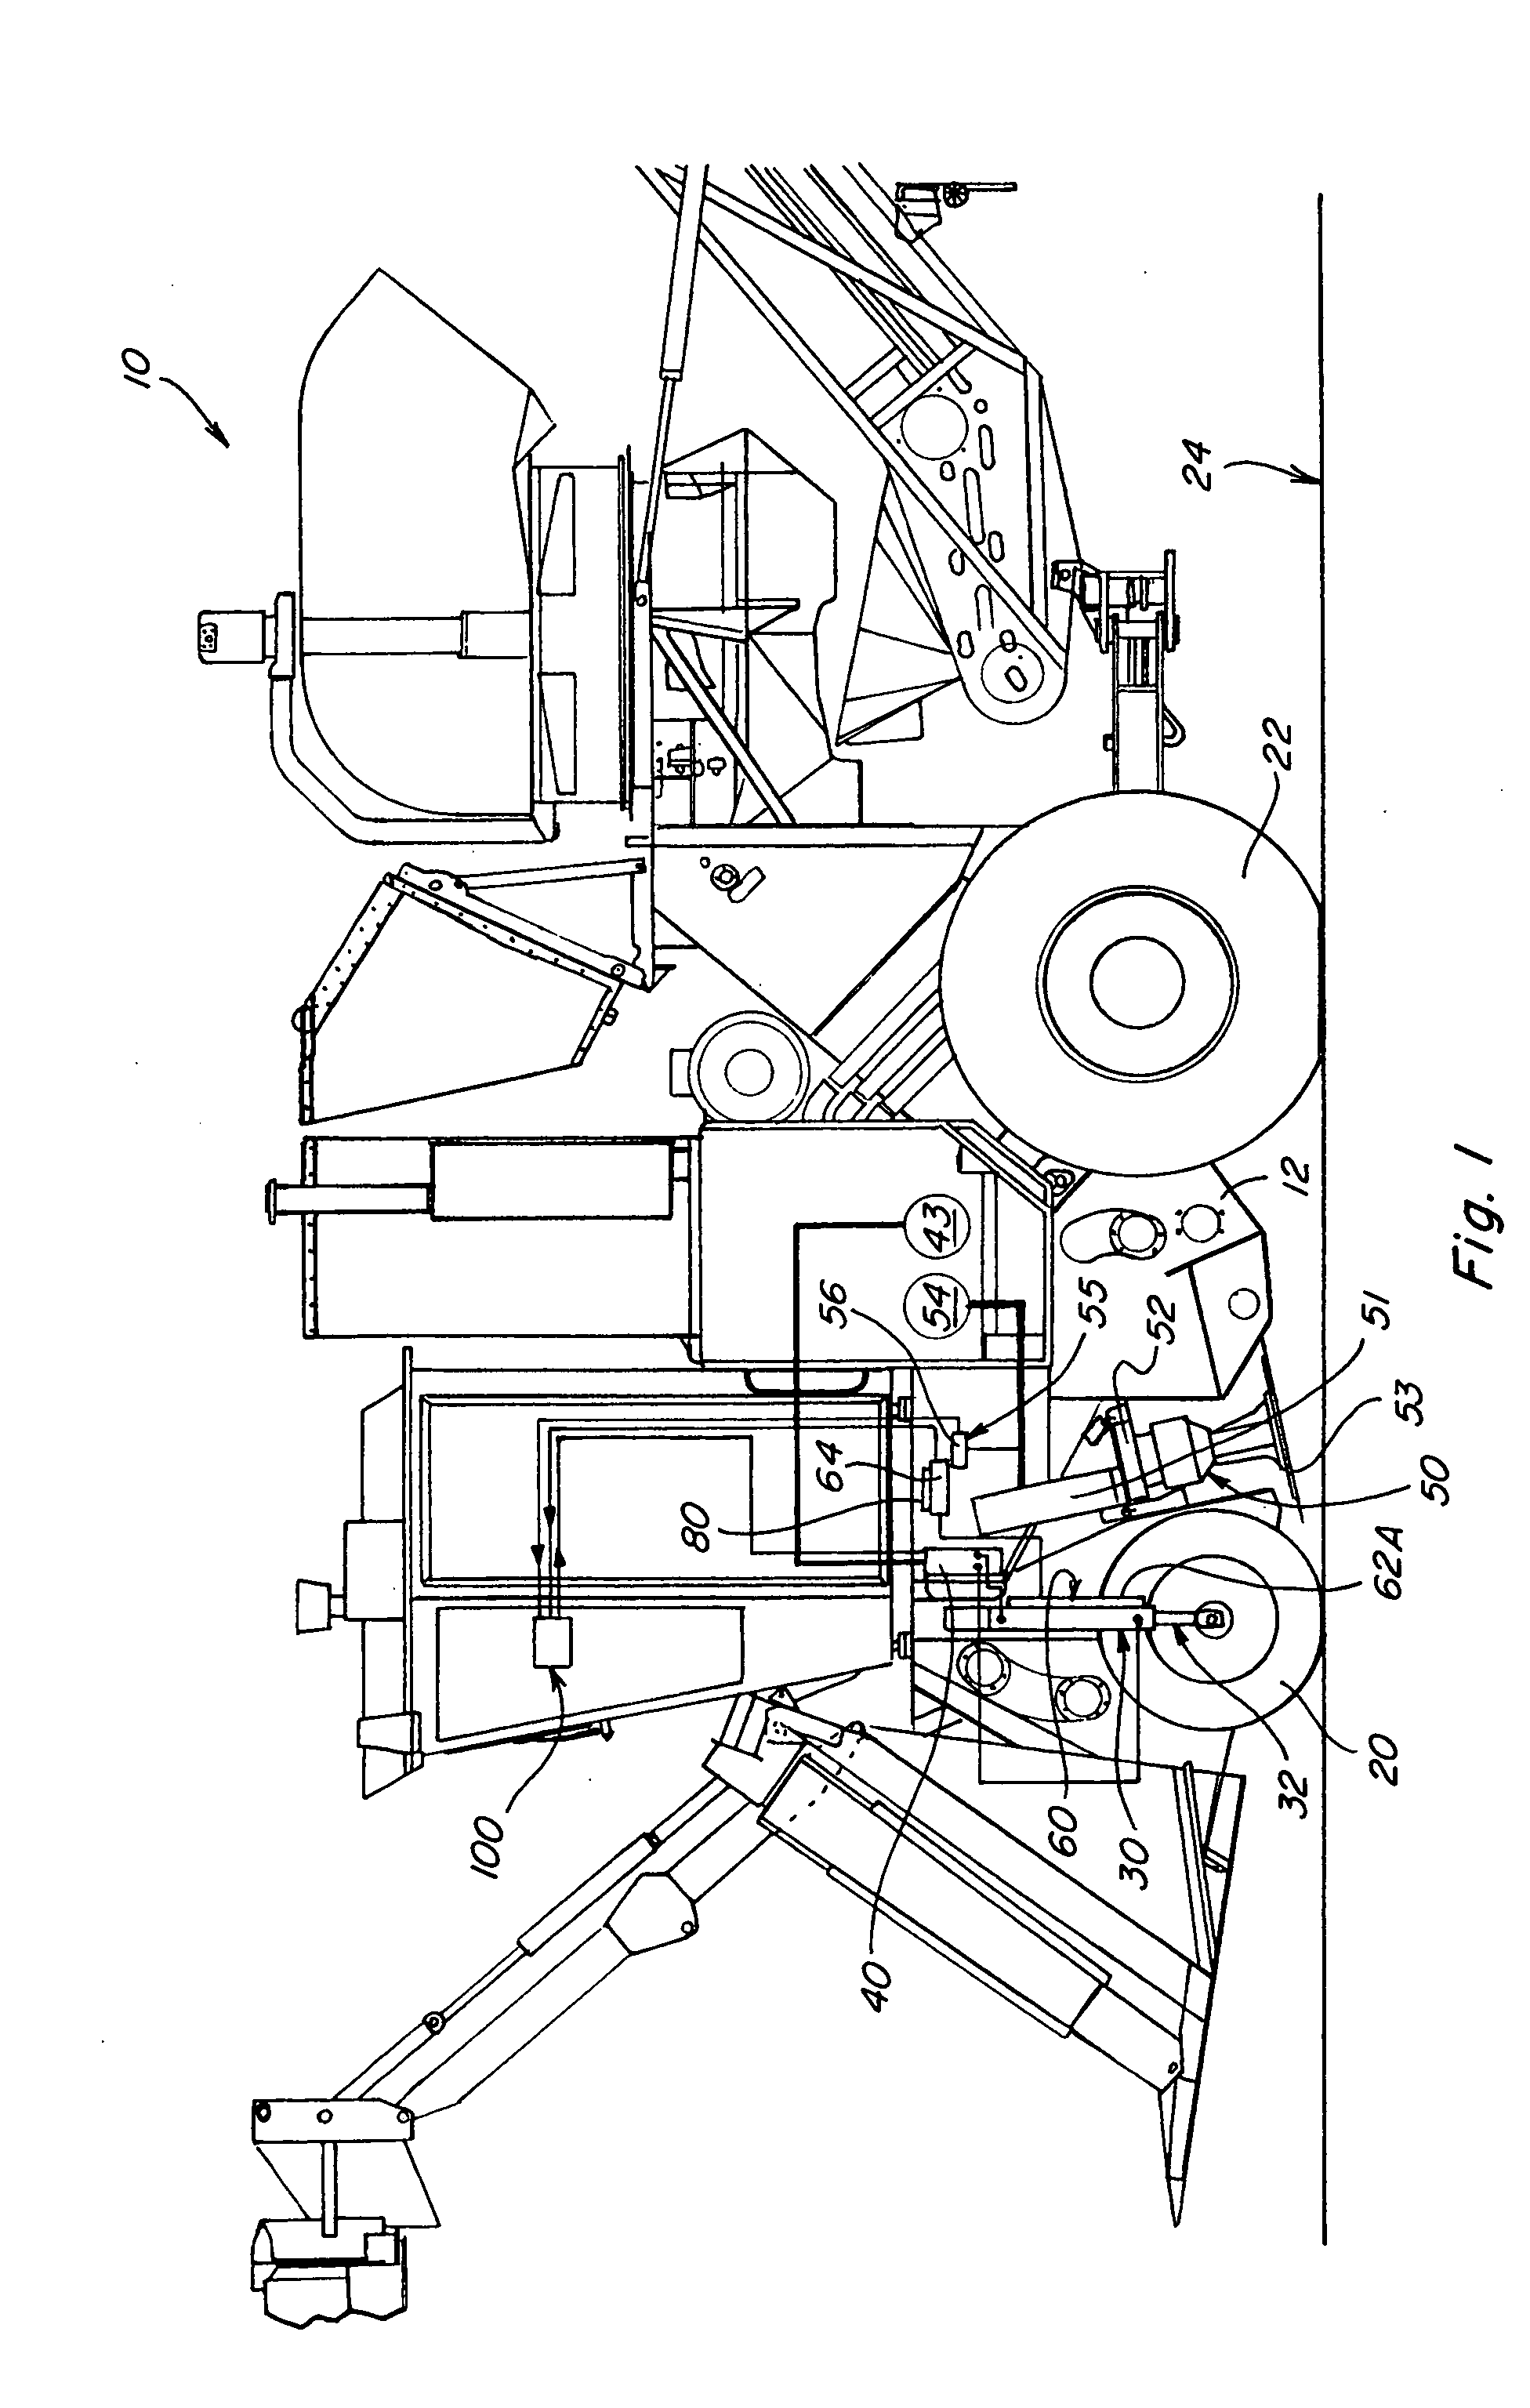 System and method for controlling the base cutter height of a sugar cane harvester